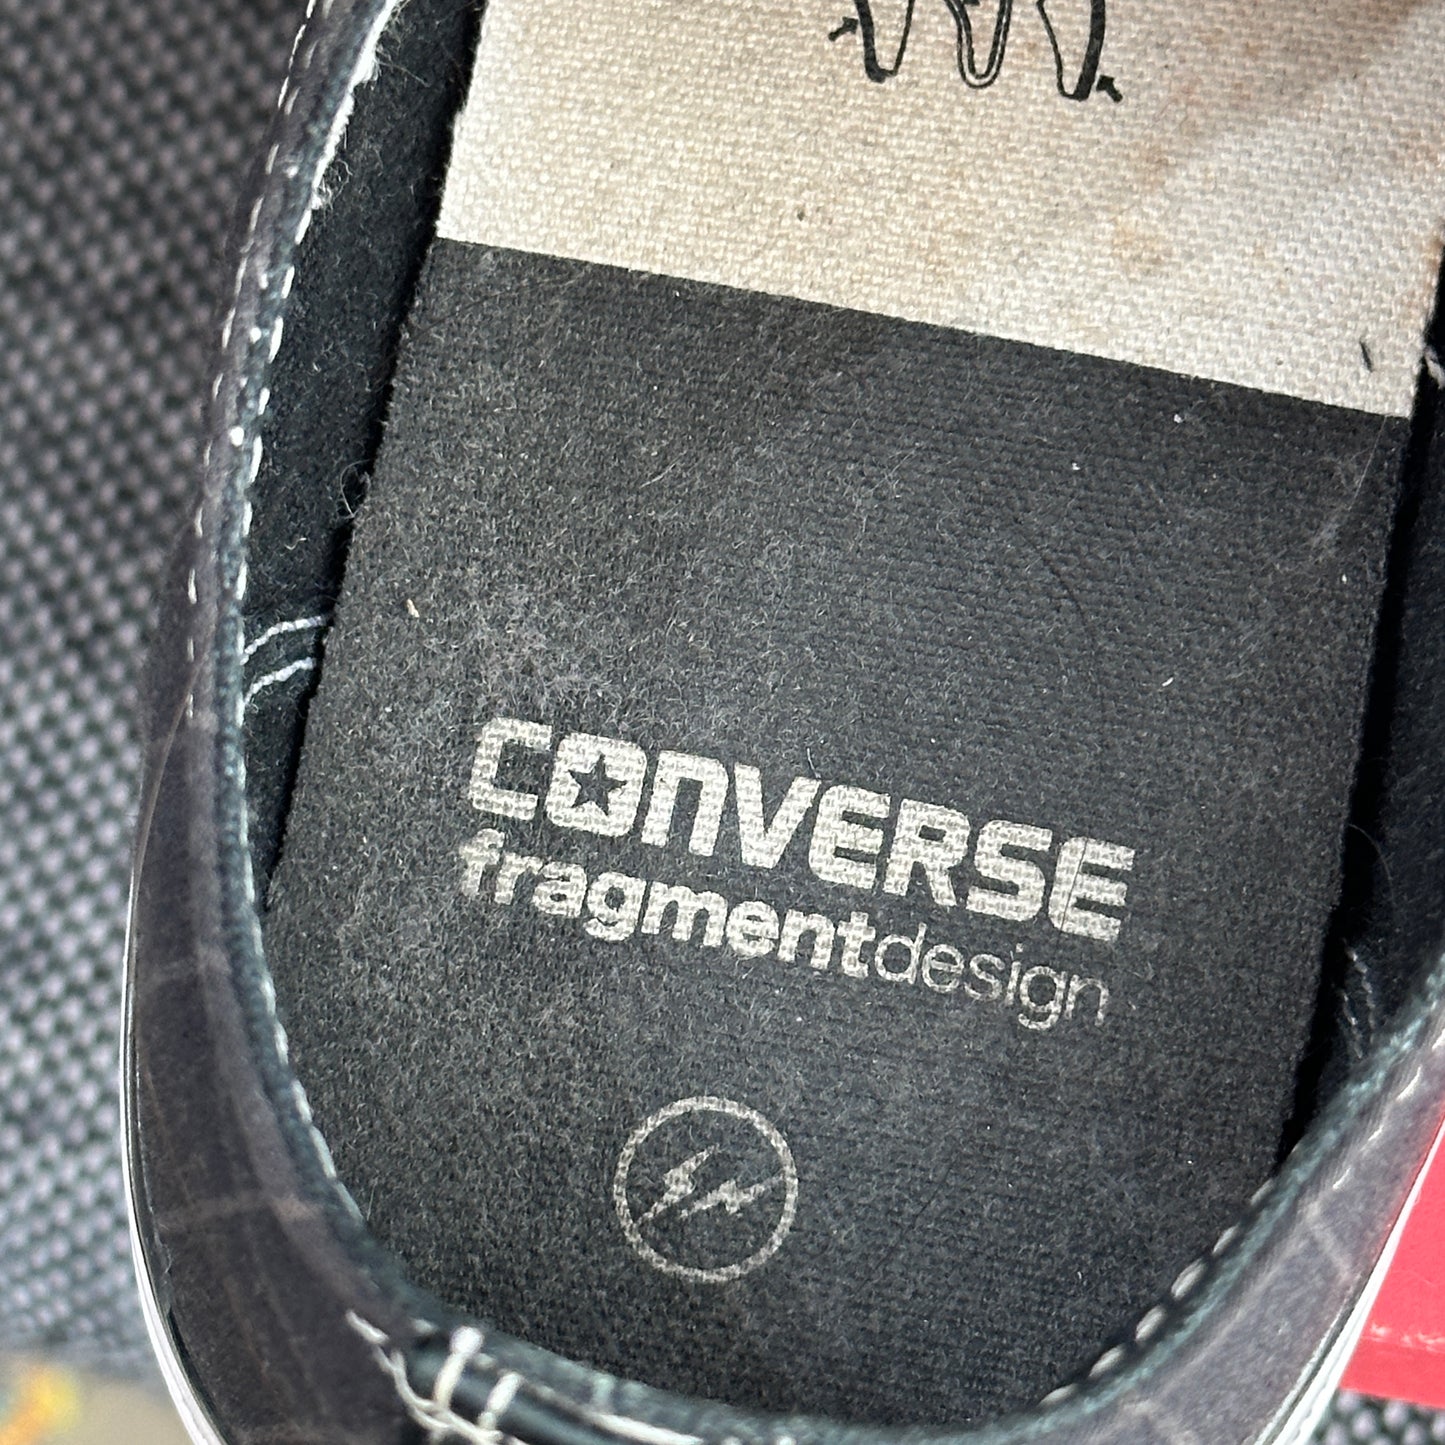 Converse All Star Chuck Taylor 70's x Fragment Design Shoes